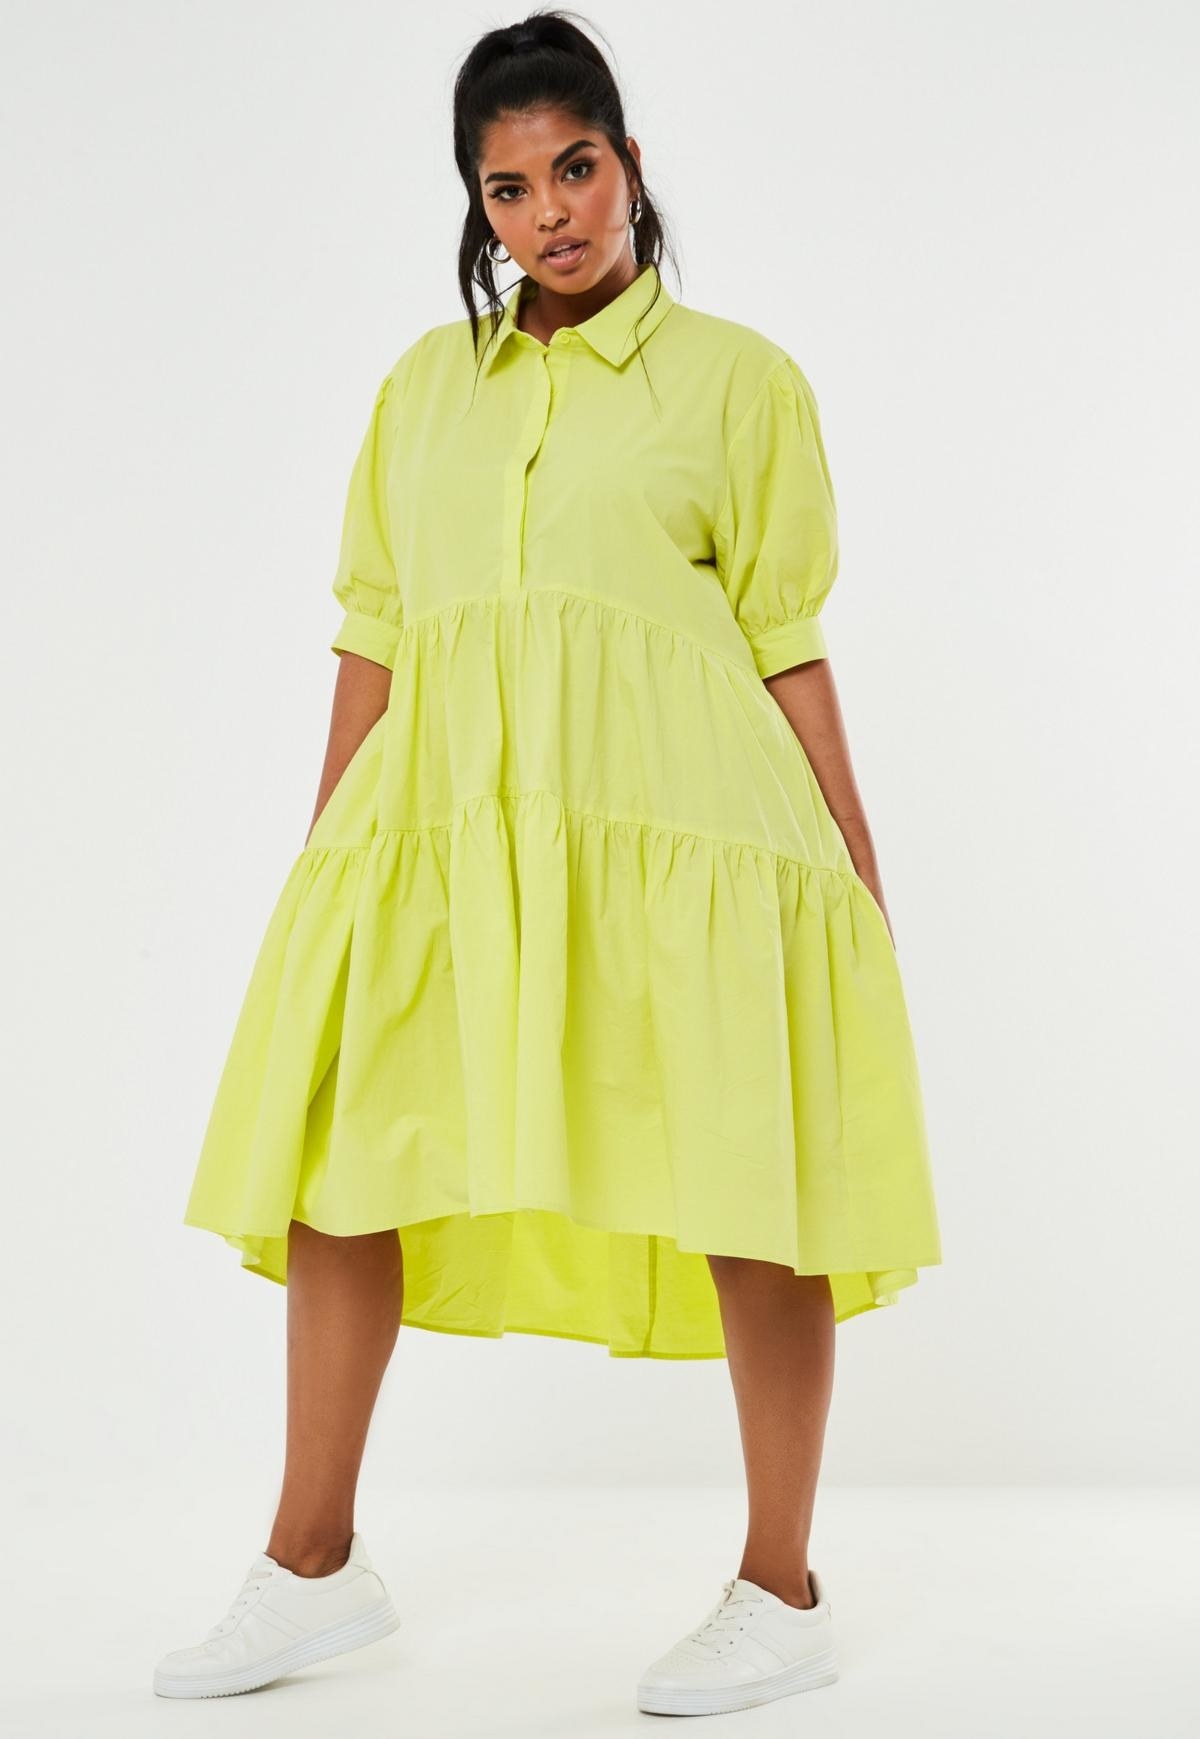 47 Stylish Dresses To Help Get You Through Spring And Into Summer